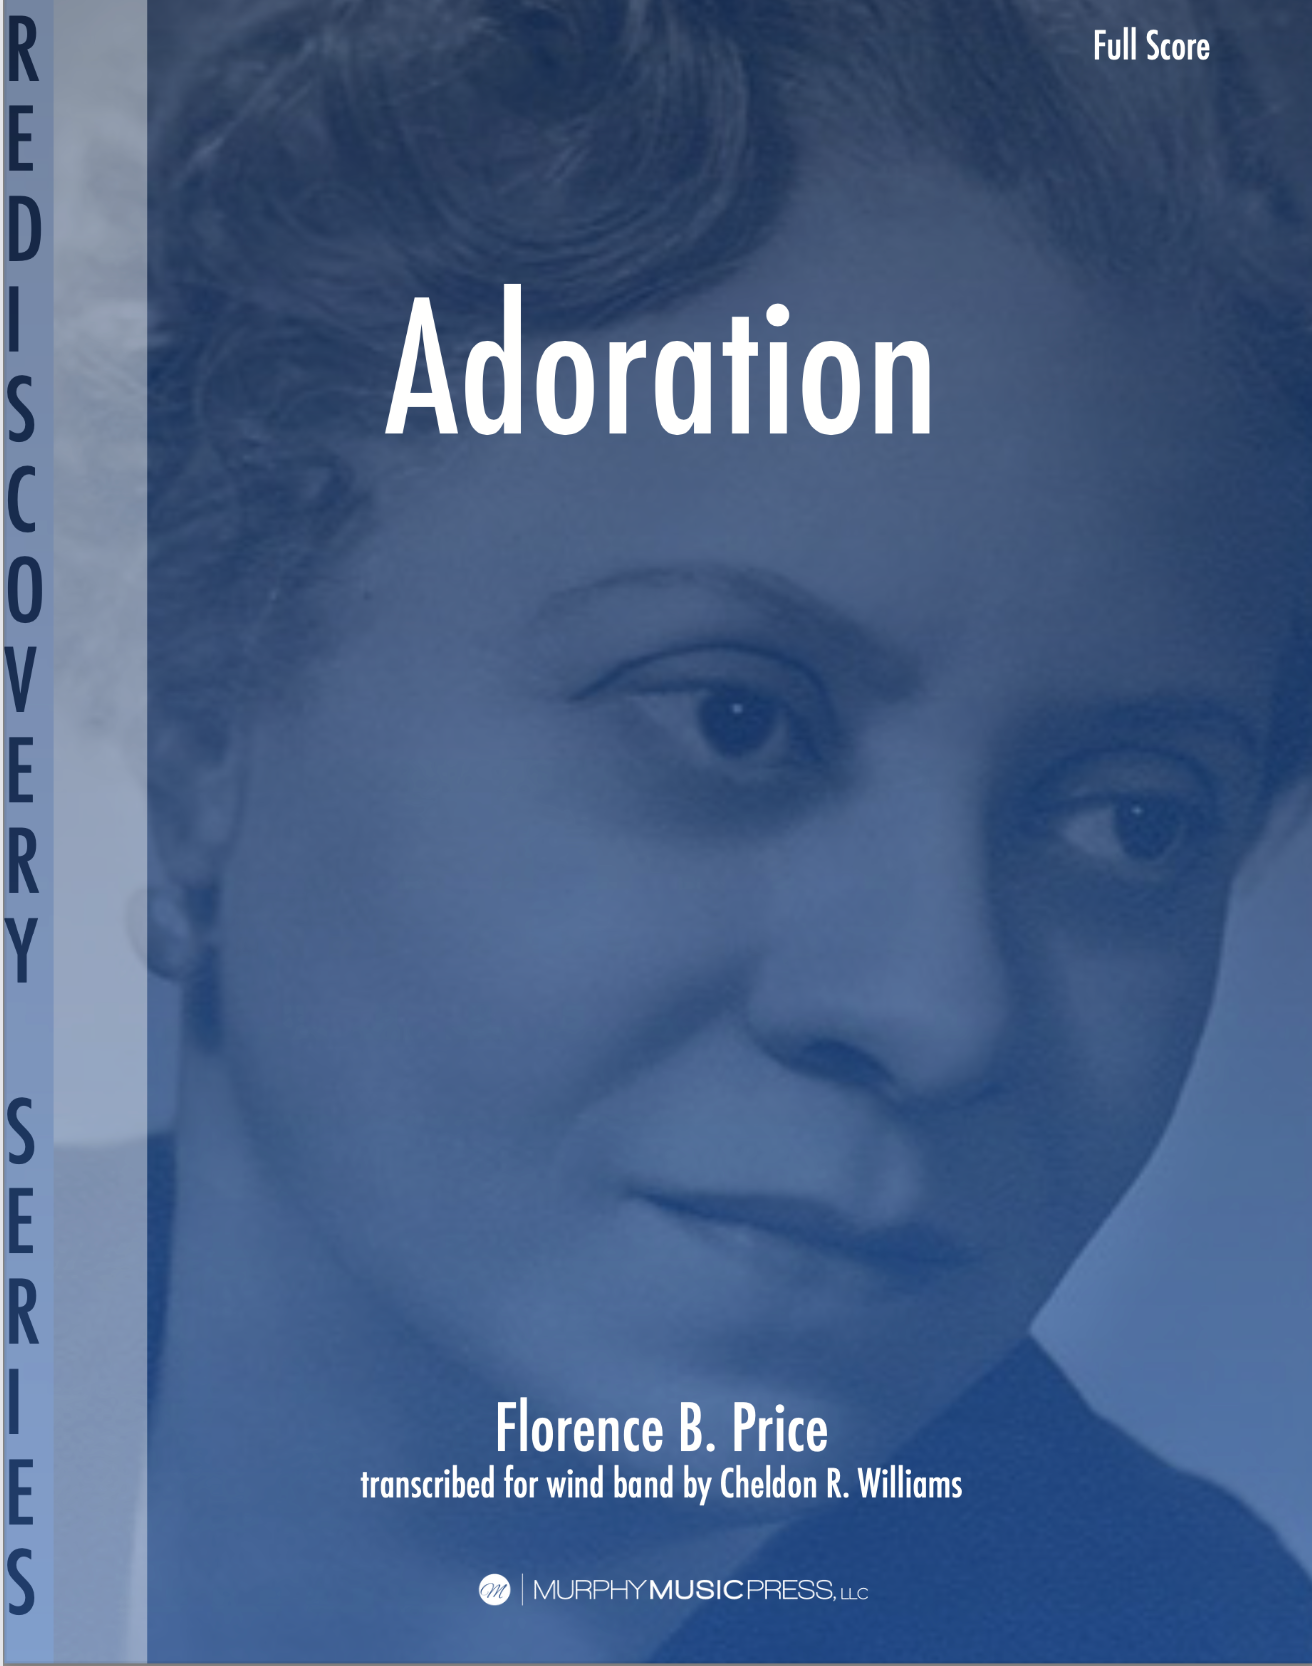 Adoration  by Price, arr. Cheldon R. Williams